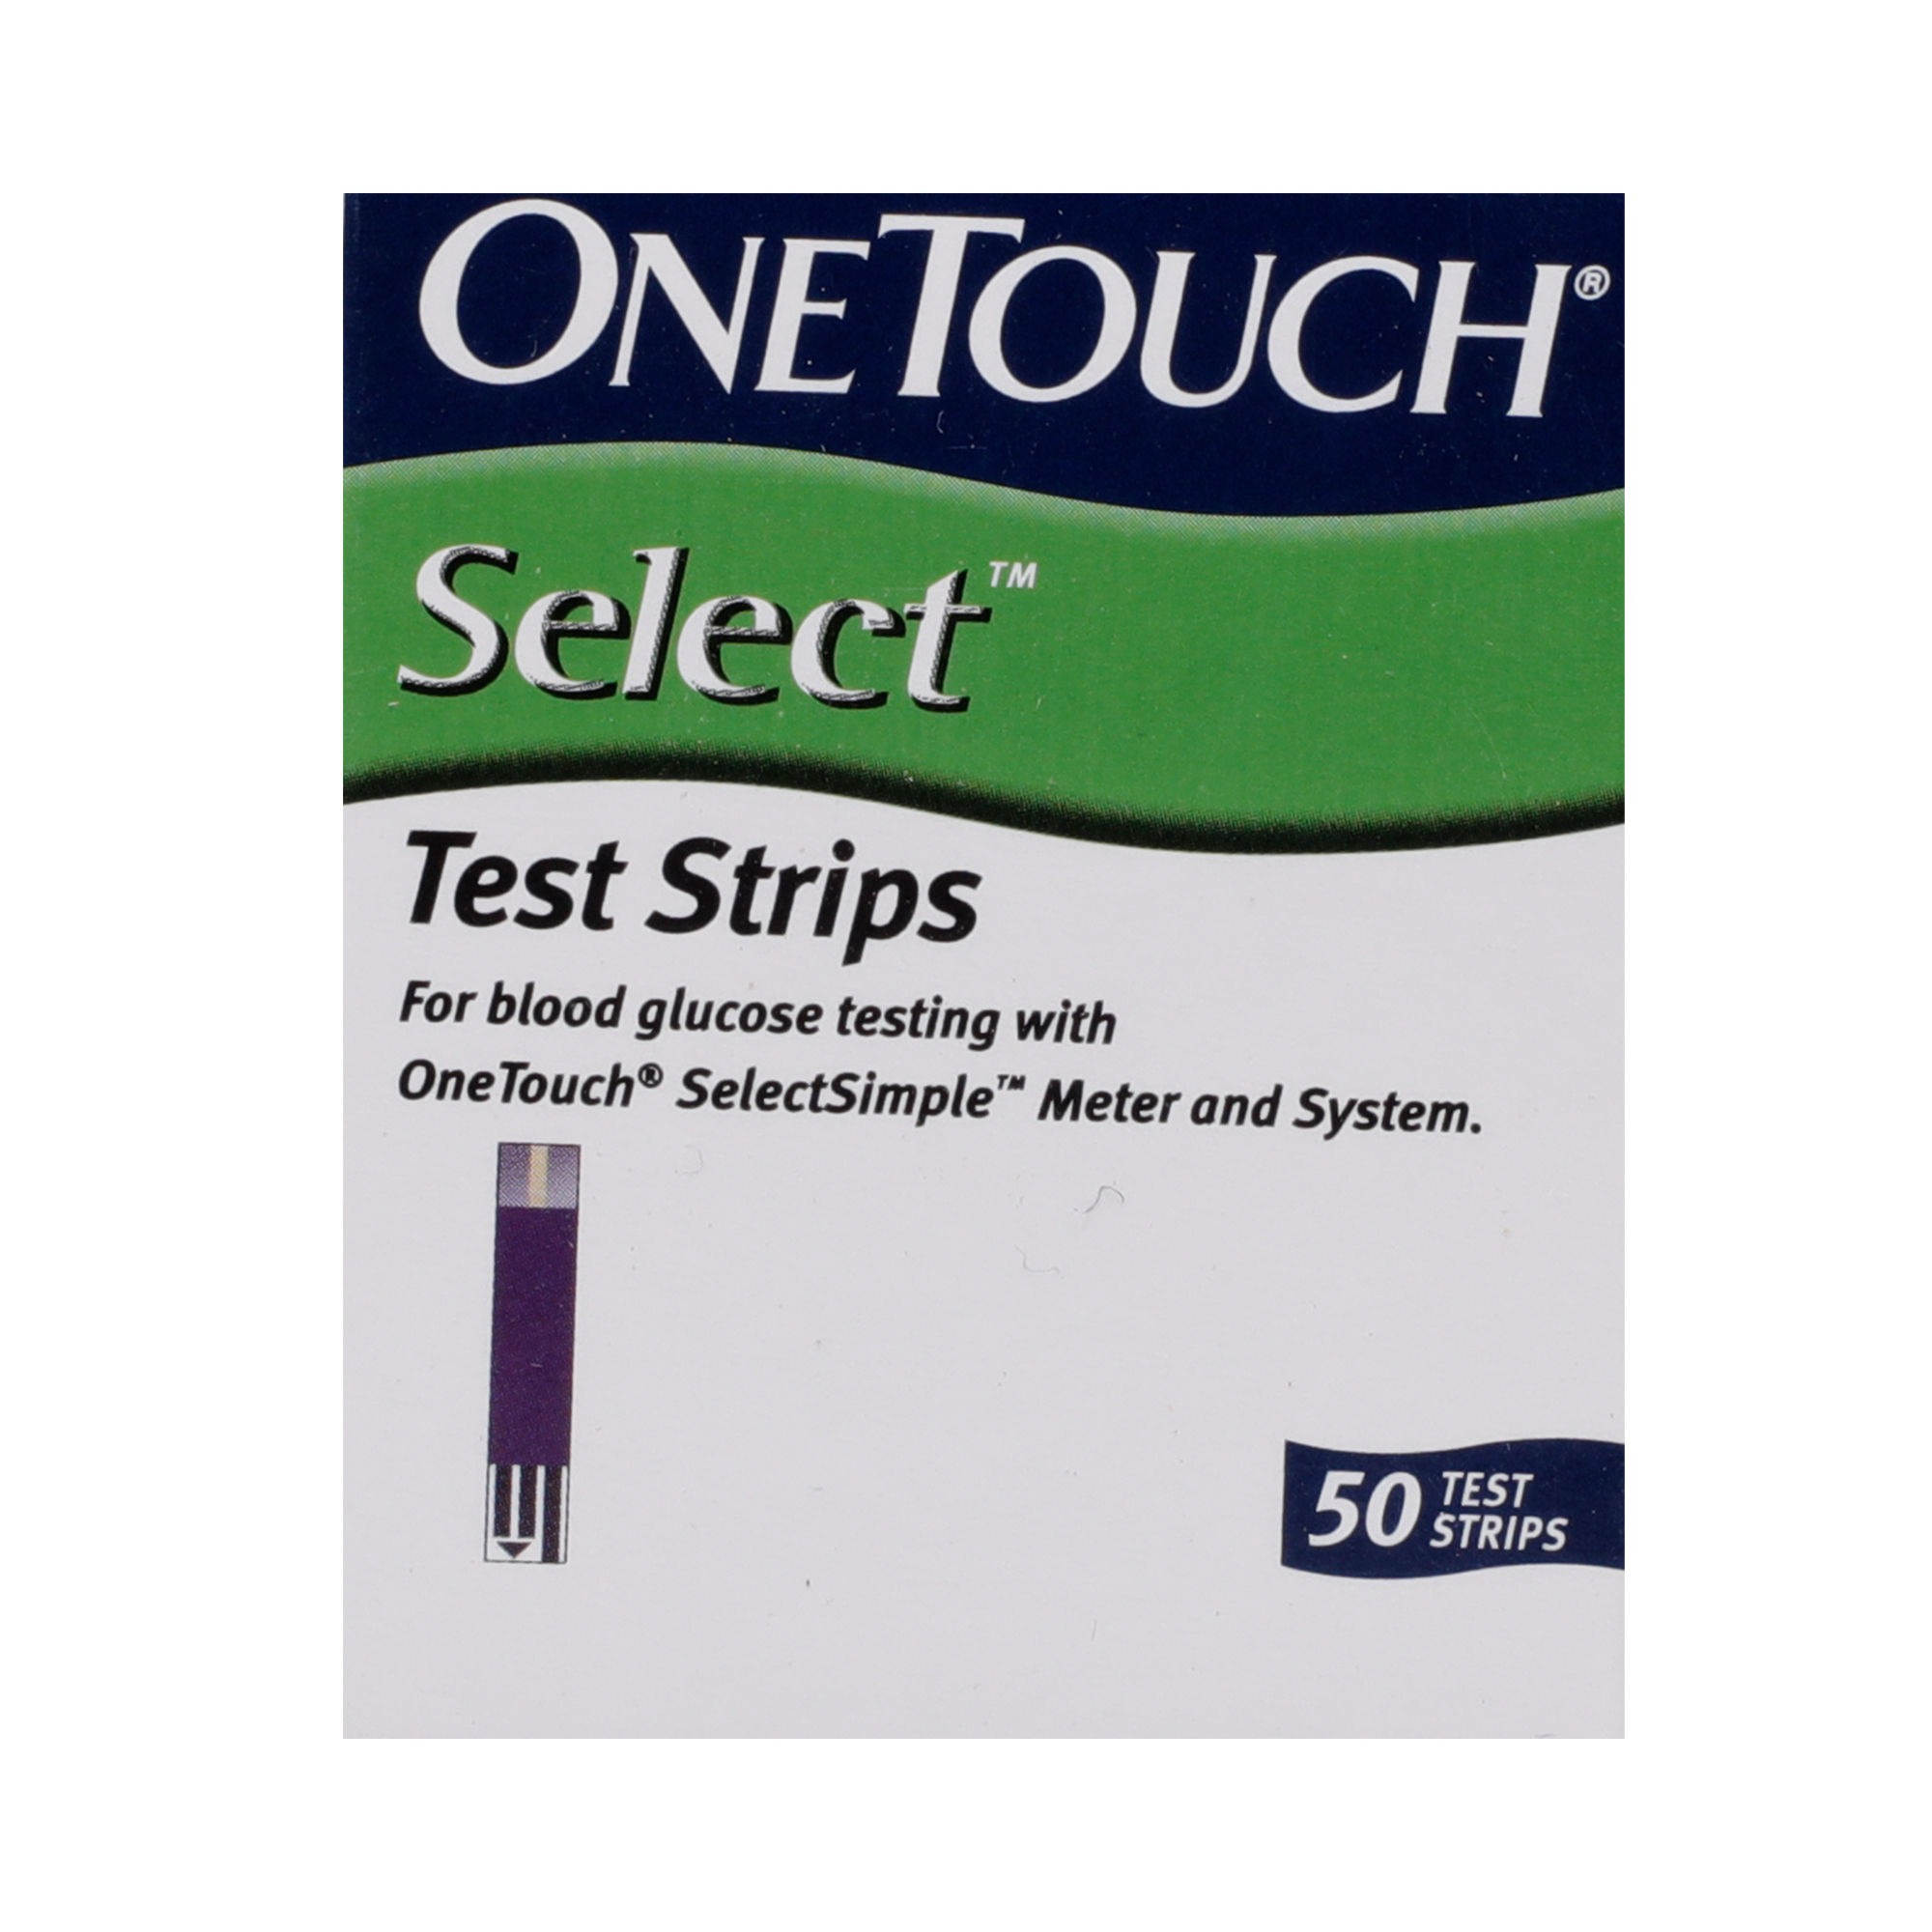 OneTouch Select Test Strips, 50 Count, Pack of 1 